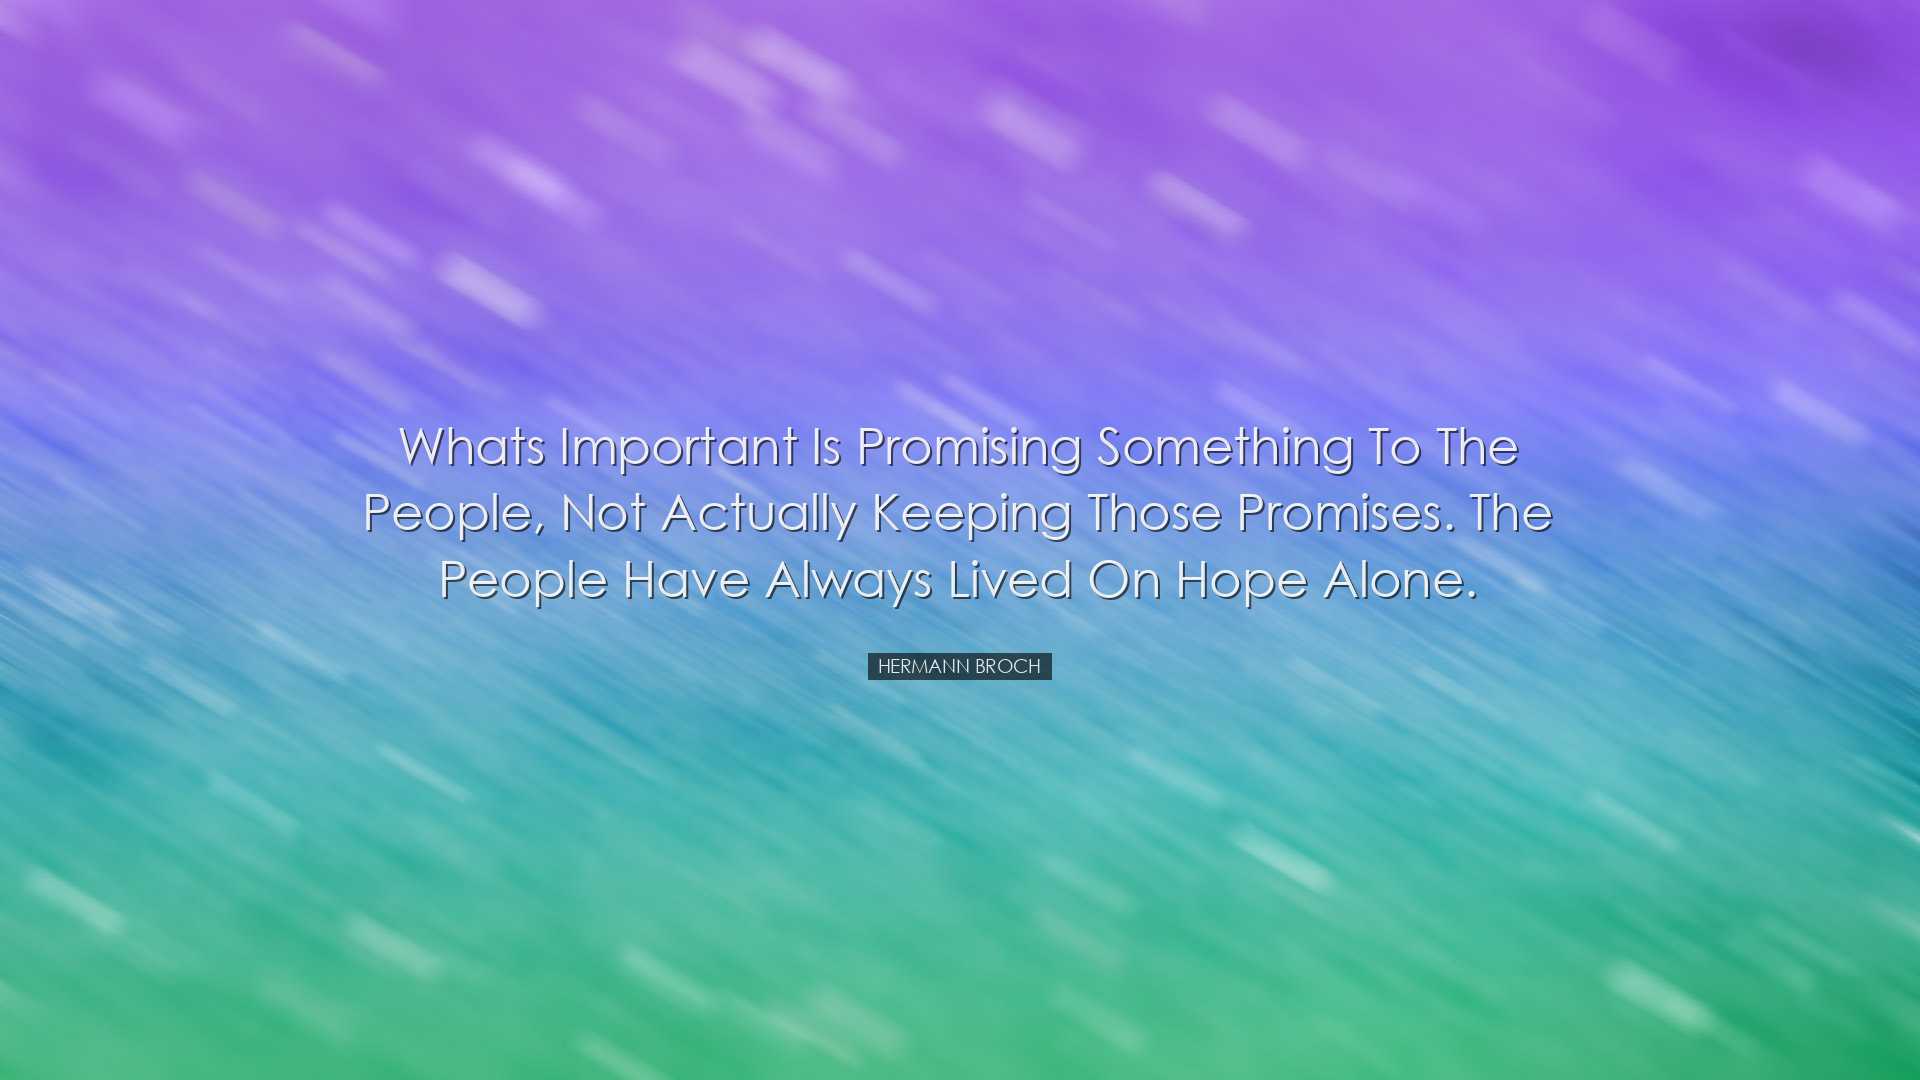 Whats important is promising something to the people, not actually